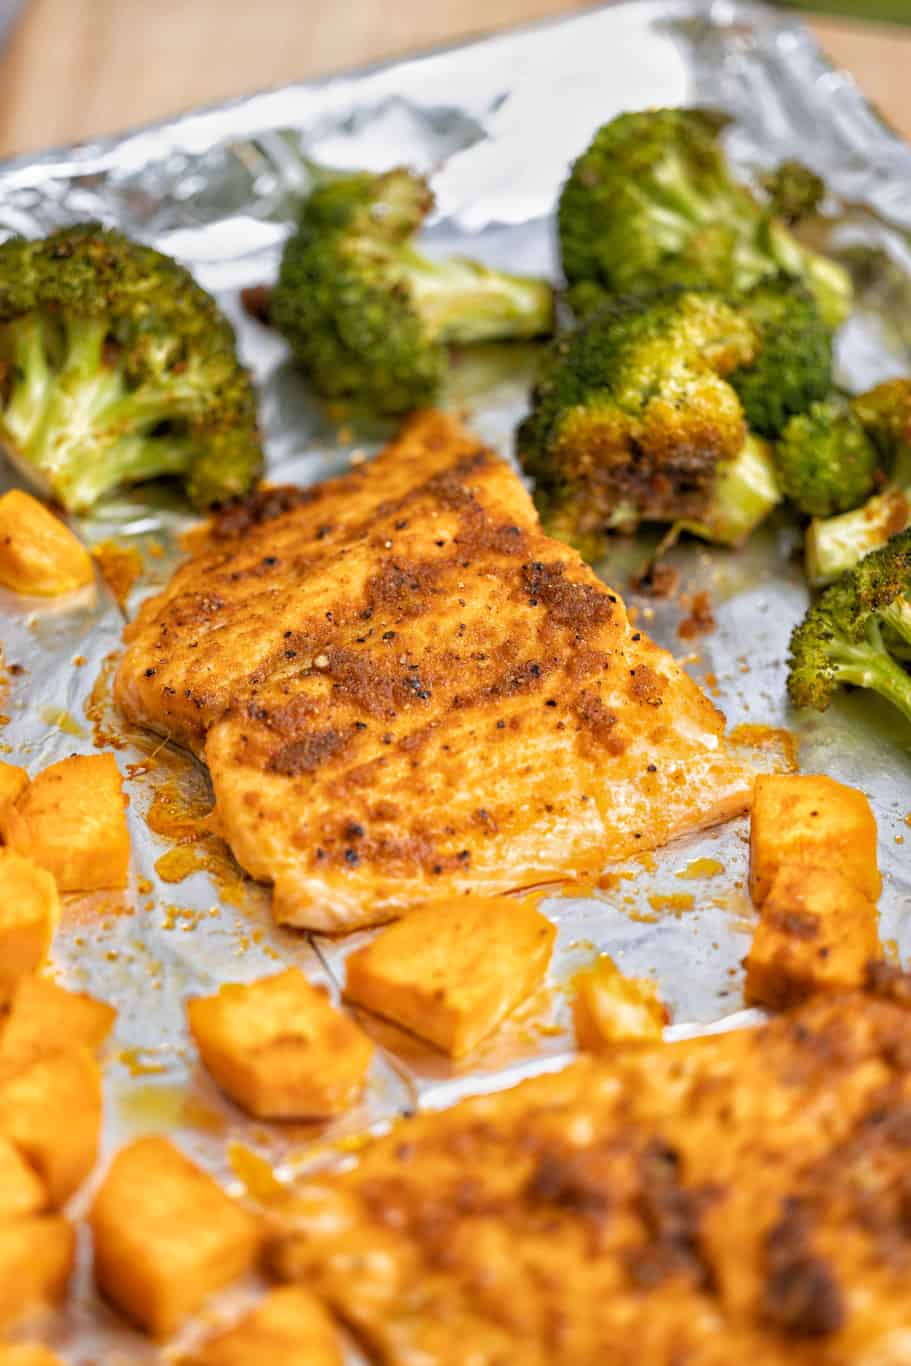 perfectly seasoned salmon filets with sweet potatoes and broccoli on a tray